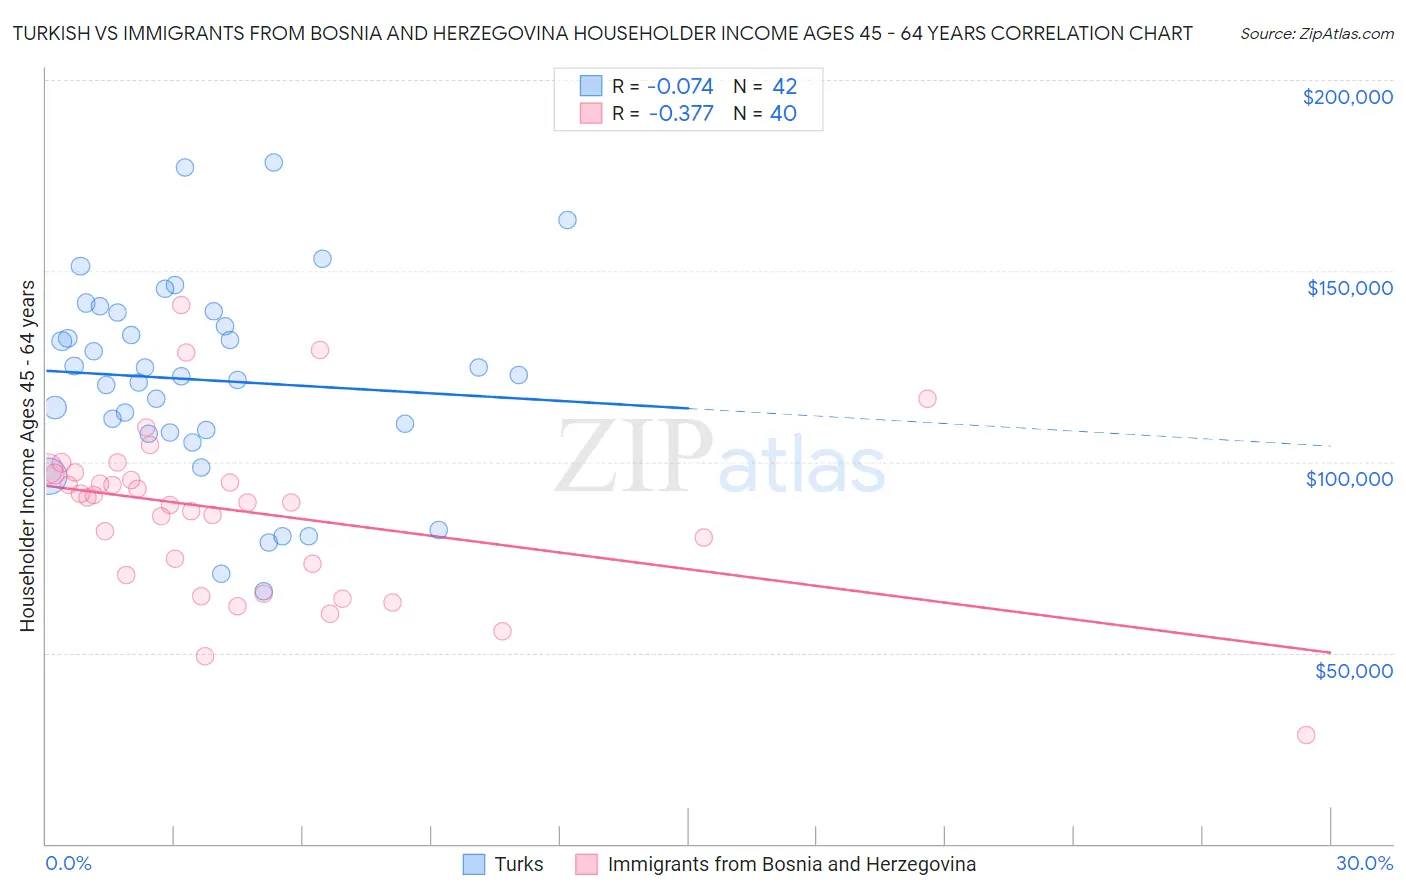 Turkish vs Immigrants from Bosnia and Herzegovina Householder Income Ages 45 - 64 years